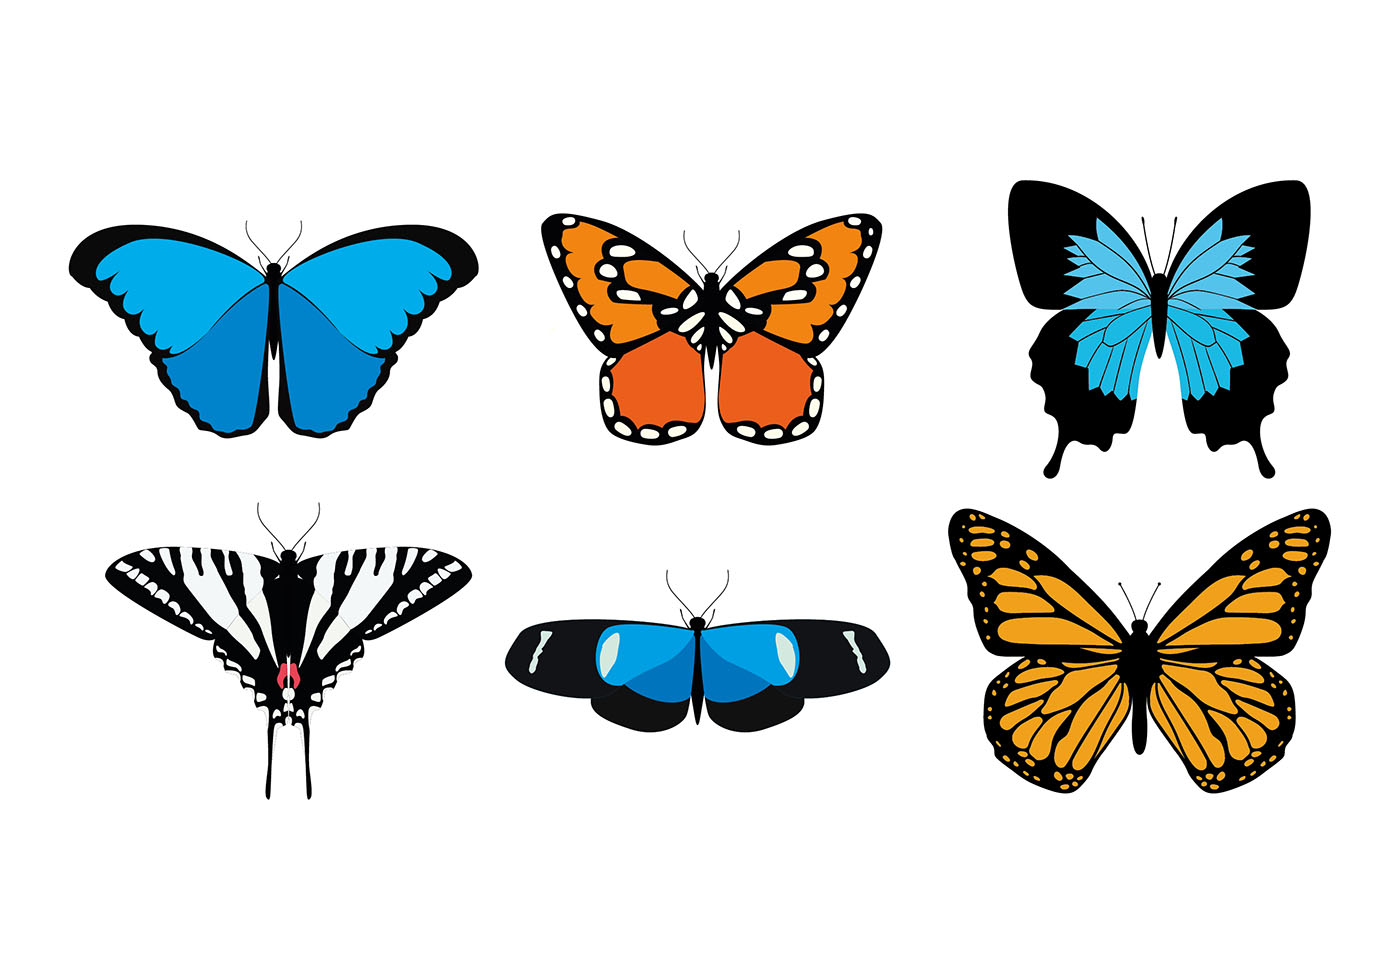 Download Butterfly Various Species Free Vector - Download Free ...